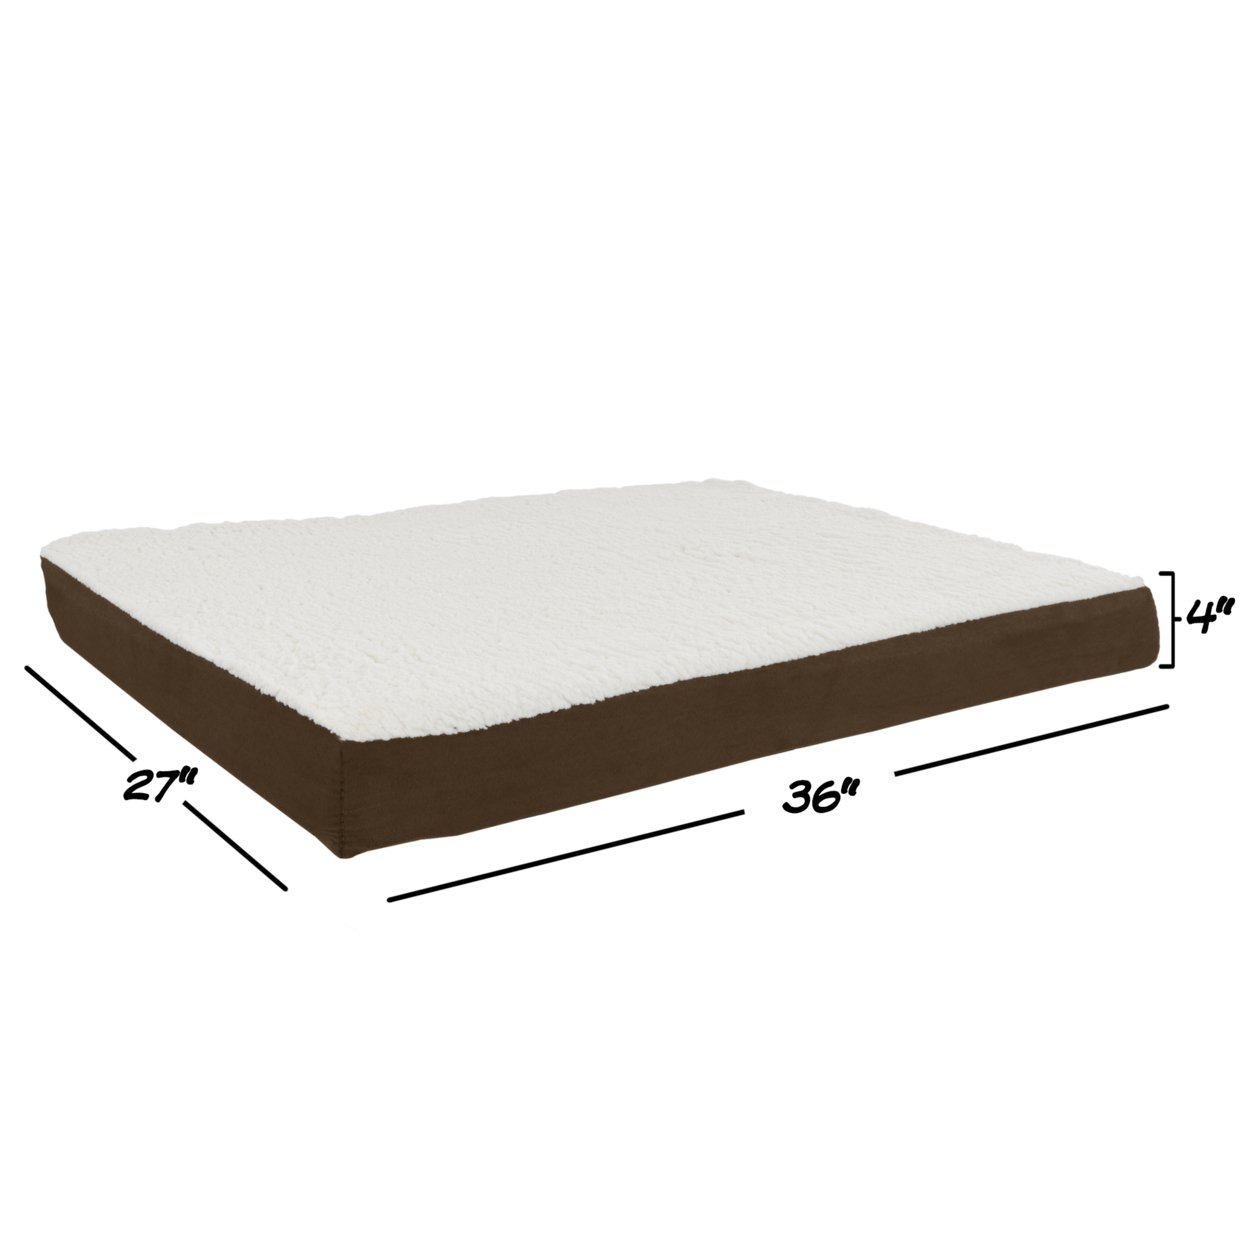 Orthopedic Sherpa Top Pet Bed With Memory Foam And Removable Cover 36 X 27 X 4 Brown Medium Large